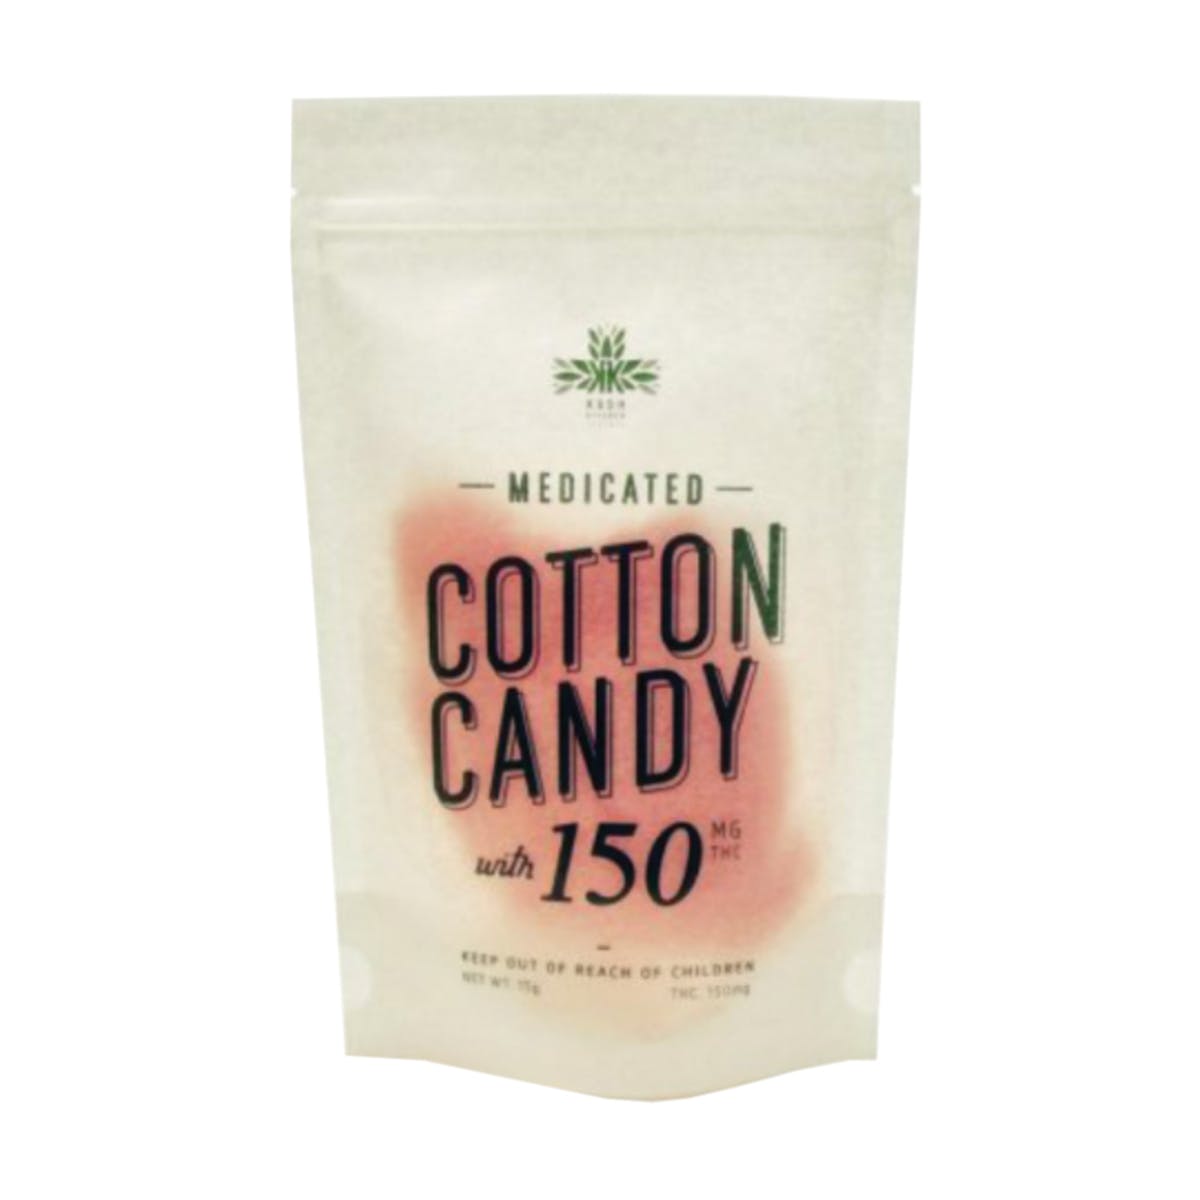 Medicated Cotton Candy